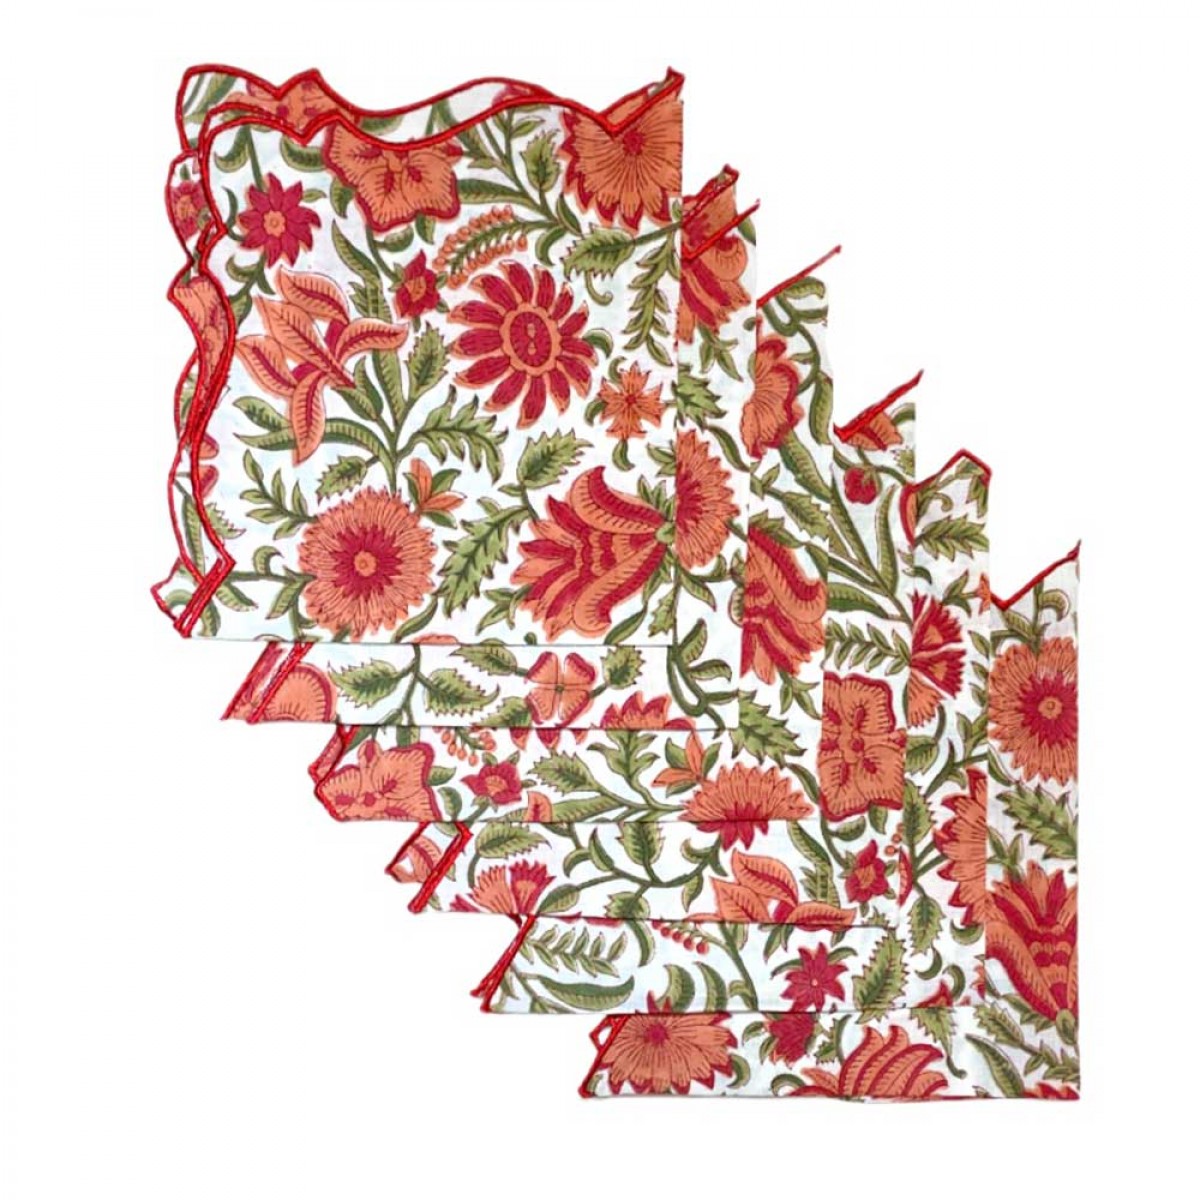 Cotton Scallop Embroidered Printed Napkin - Red Flowers (Set of 6)